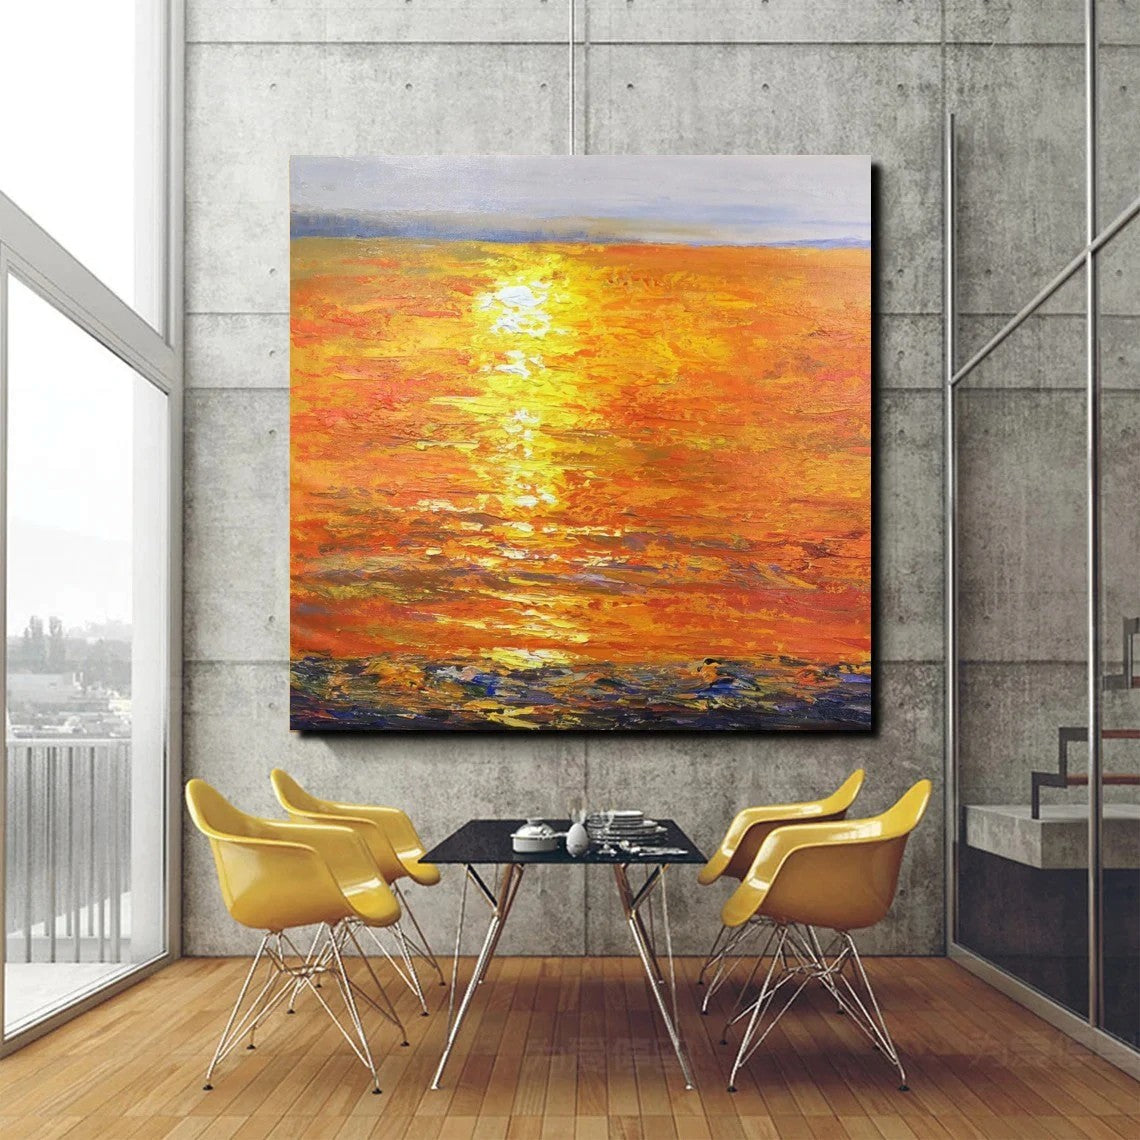 Landscape Acrylic Paintings, Sunrise Seascape Painting, Modern Wall Art Paintings, Heavy Texture Painting, Large Painting Behind Sofa